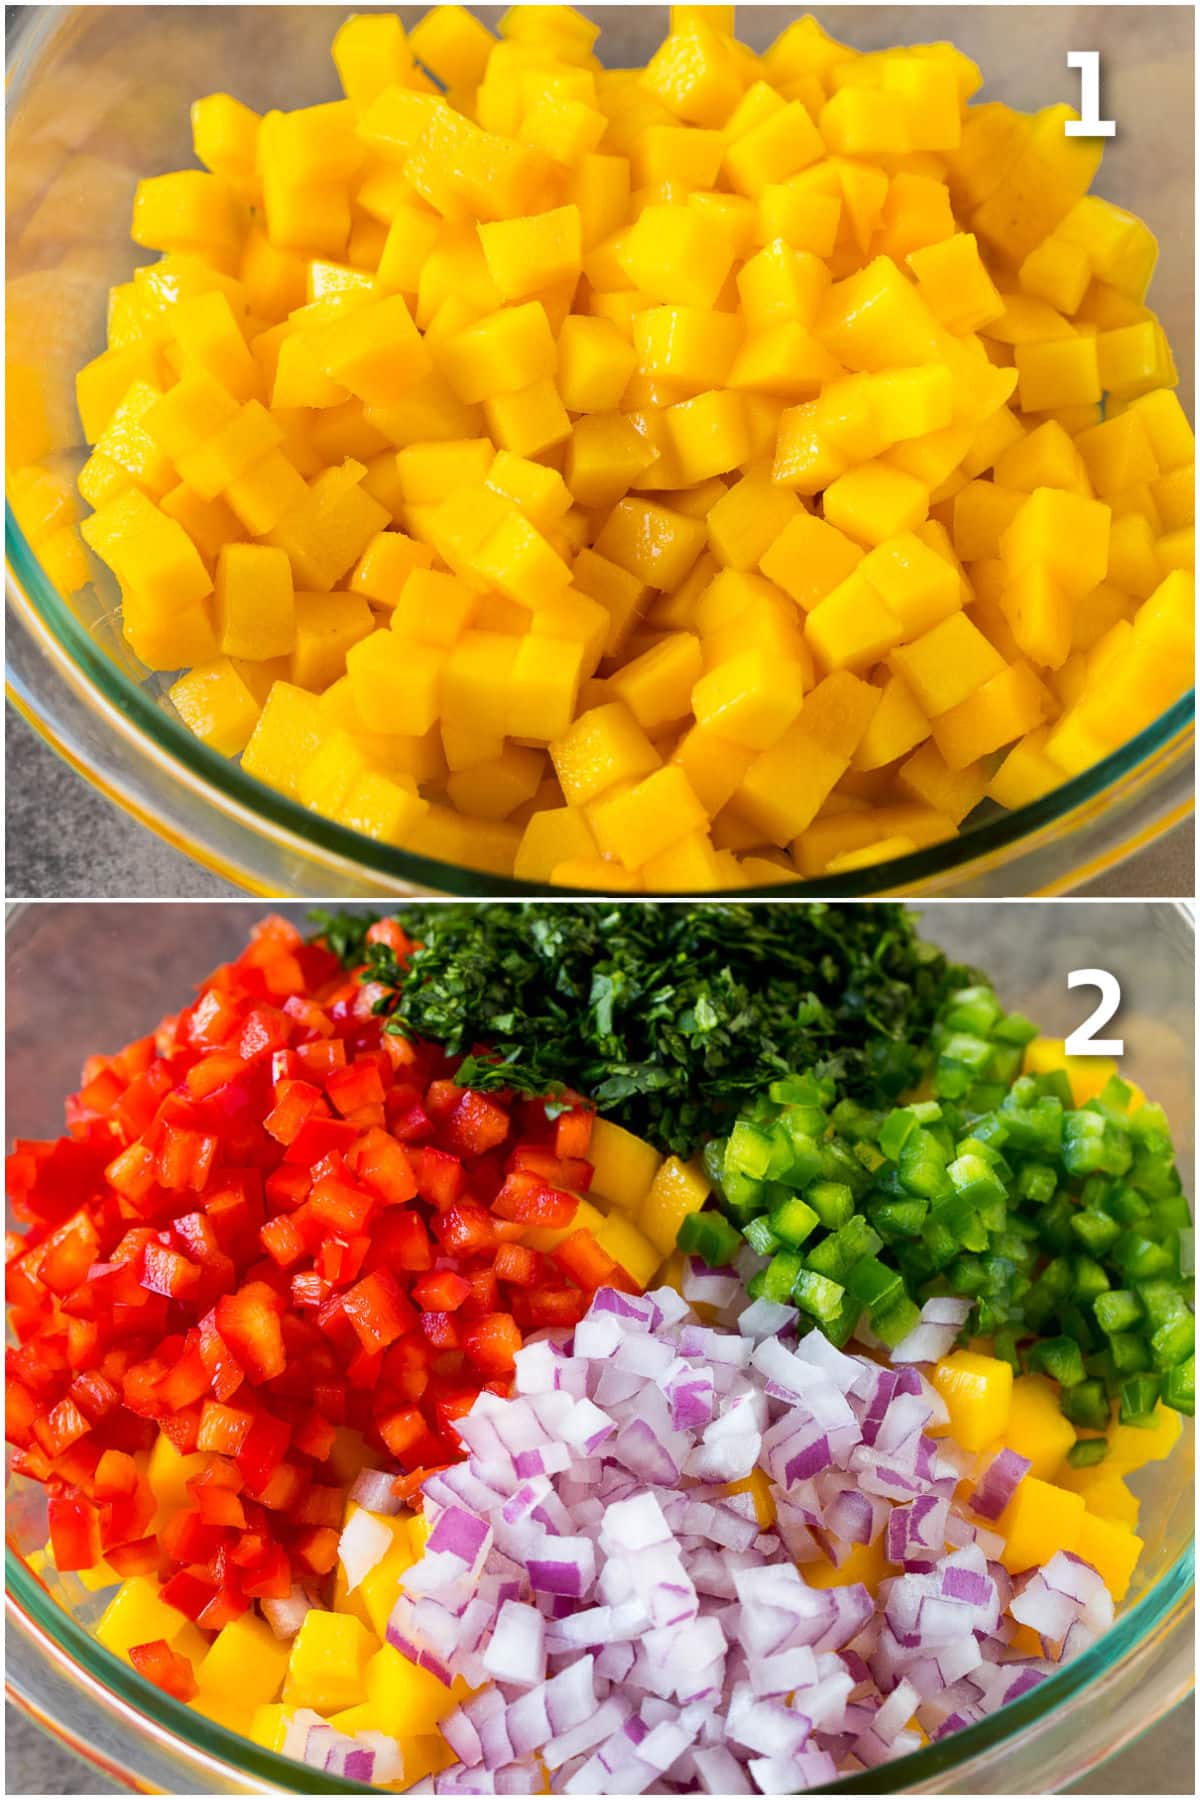 Shots showing how to combine diced mango and vegetables to make salsa.